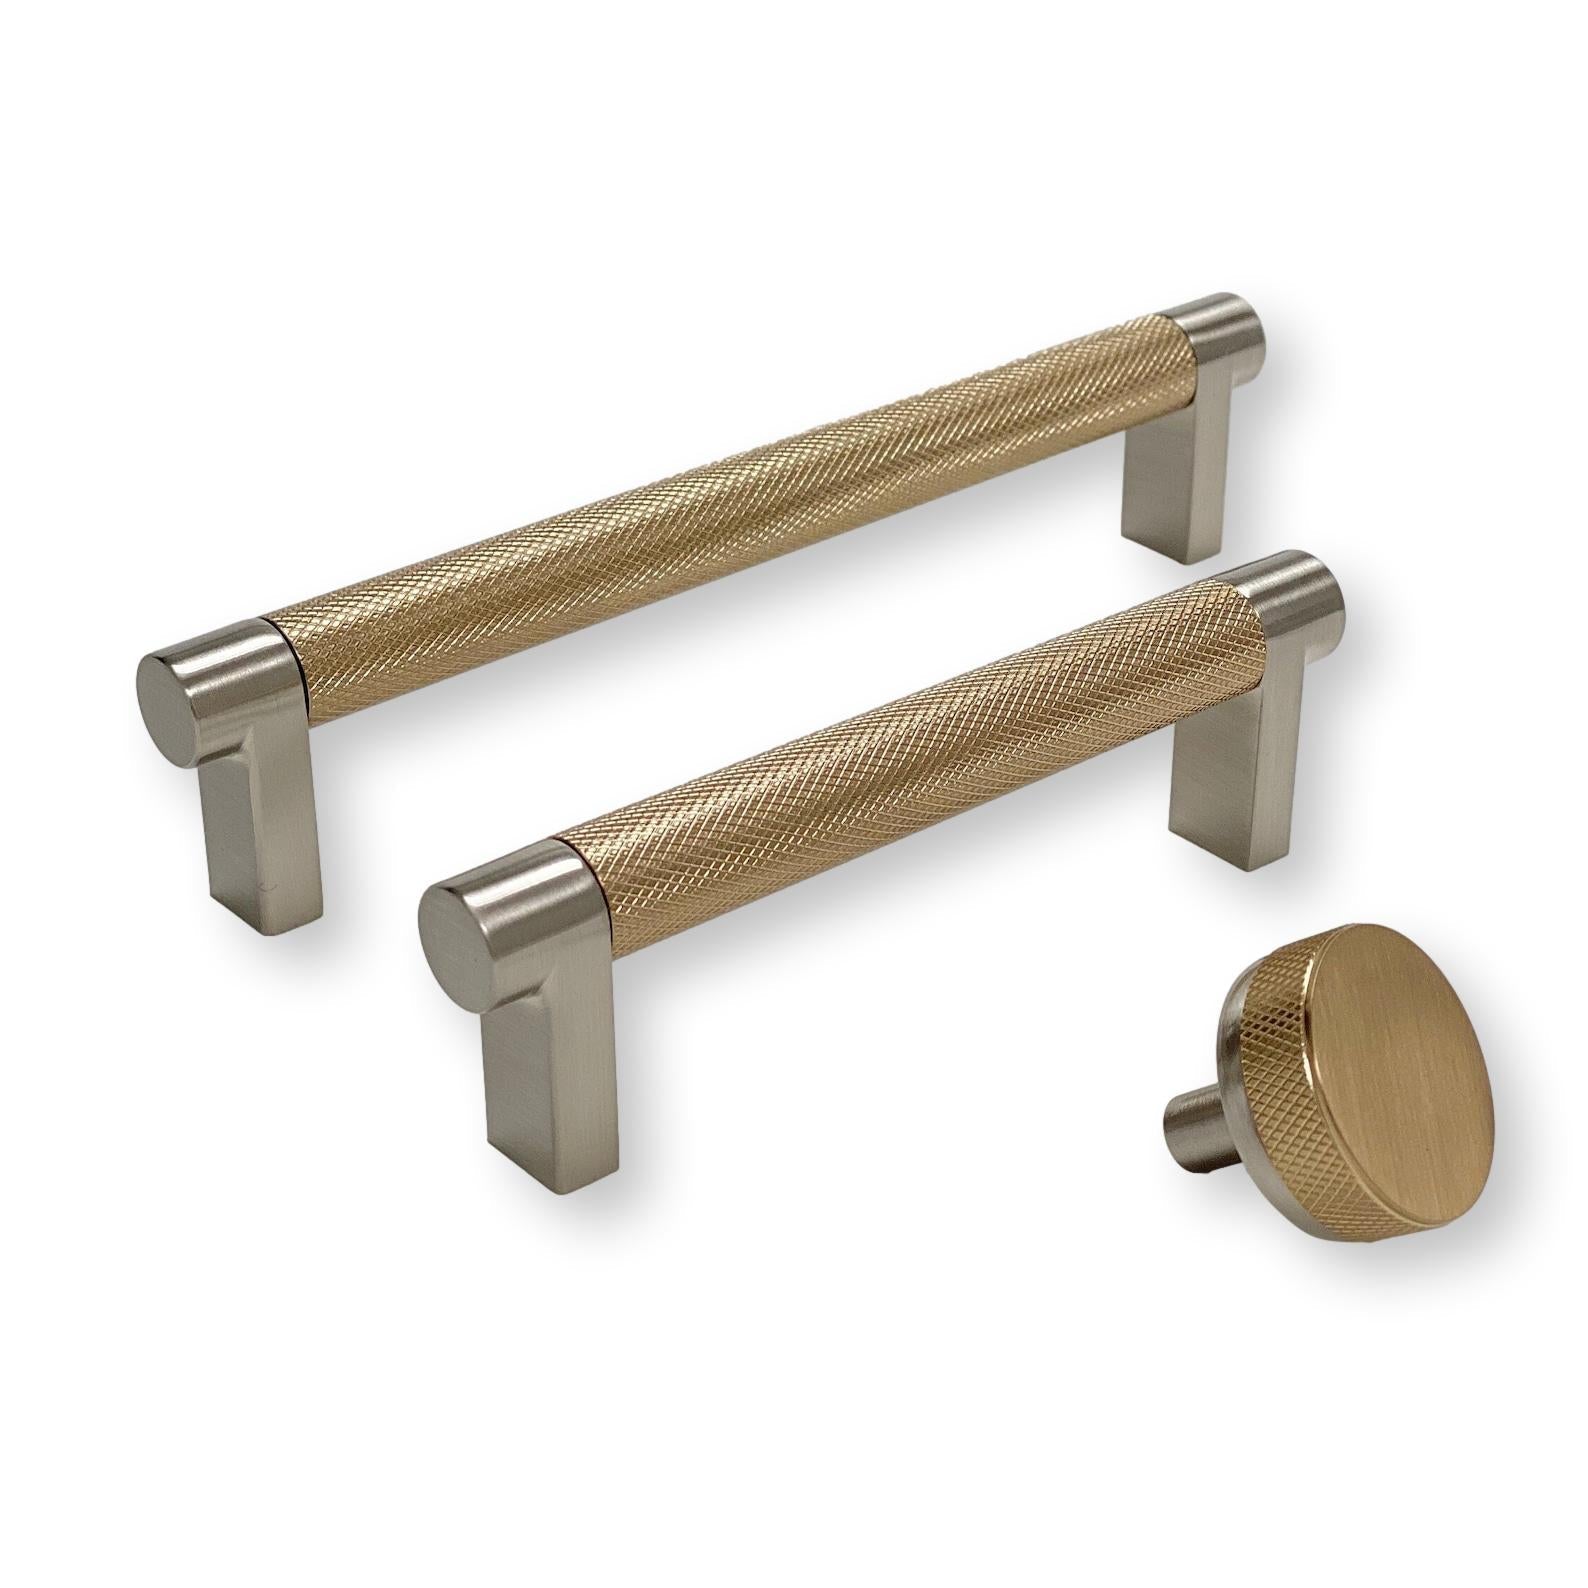 Knurled "Converse" Brushed Nickel and Champagne Bronze Dual-Finish Knobs and Pulls